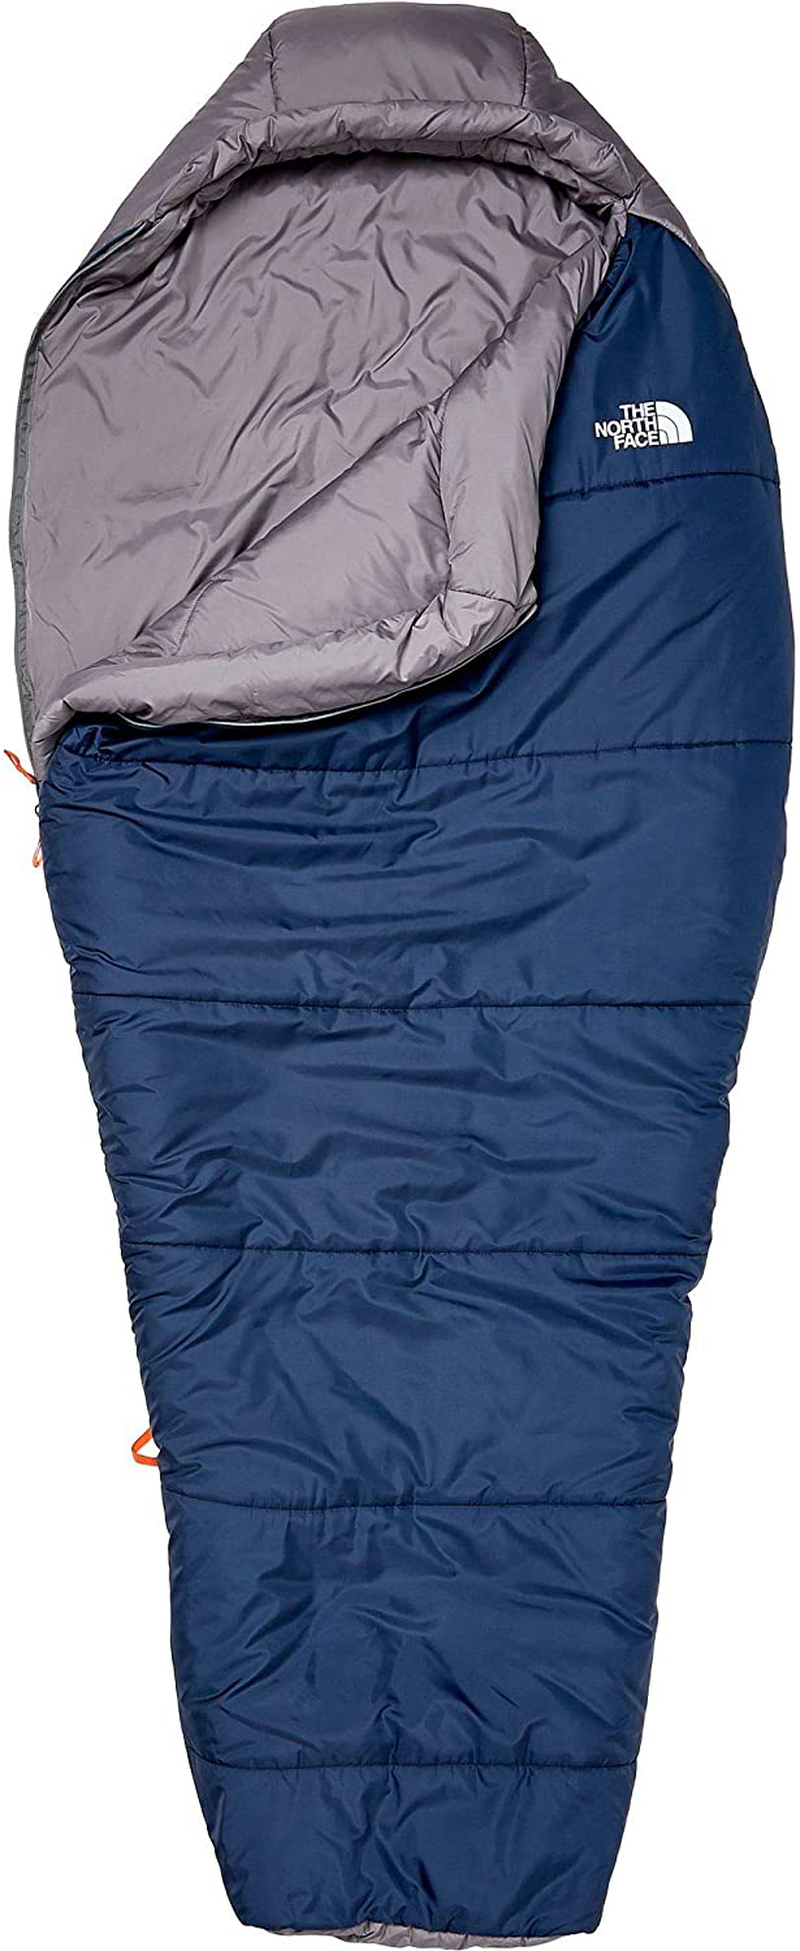 The North Face Youth Wasatch 20 Sleeping Bags Camp Bedding Regular Right Hand Sporting Goods > Outdoor Recreation > Camping & Hiking > Sleeping Bags The North Face   